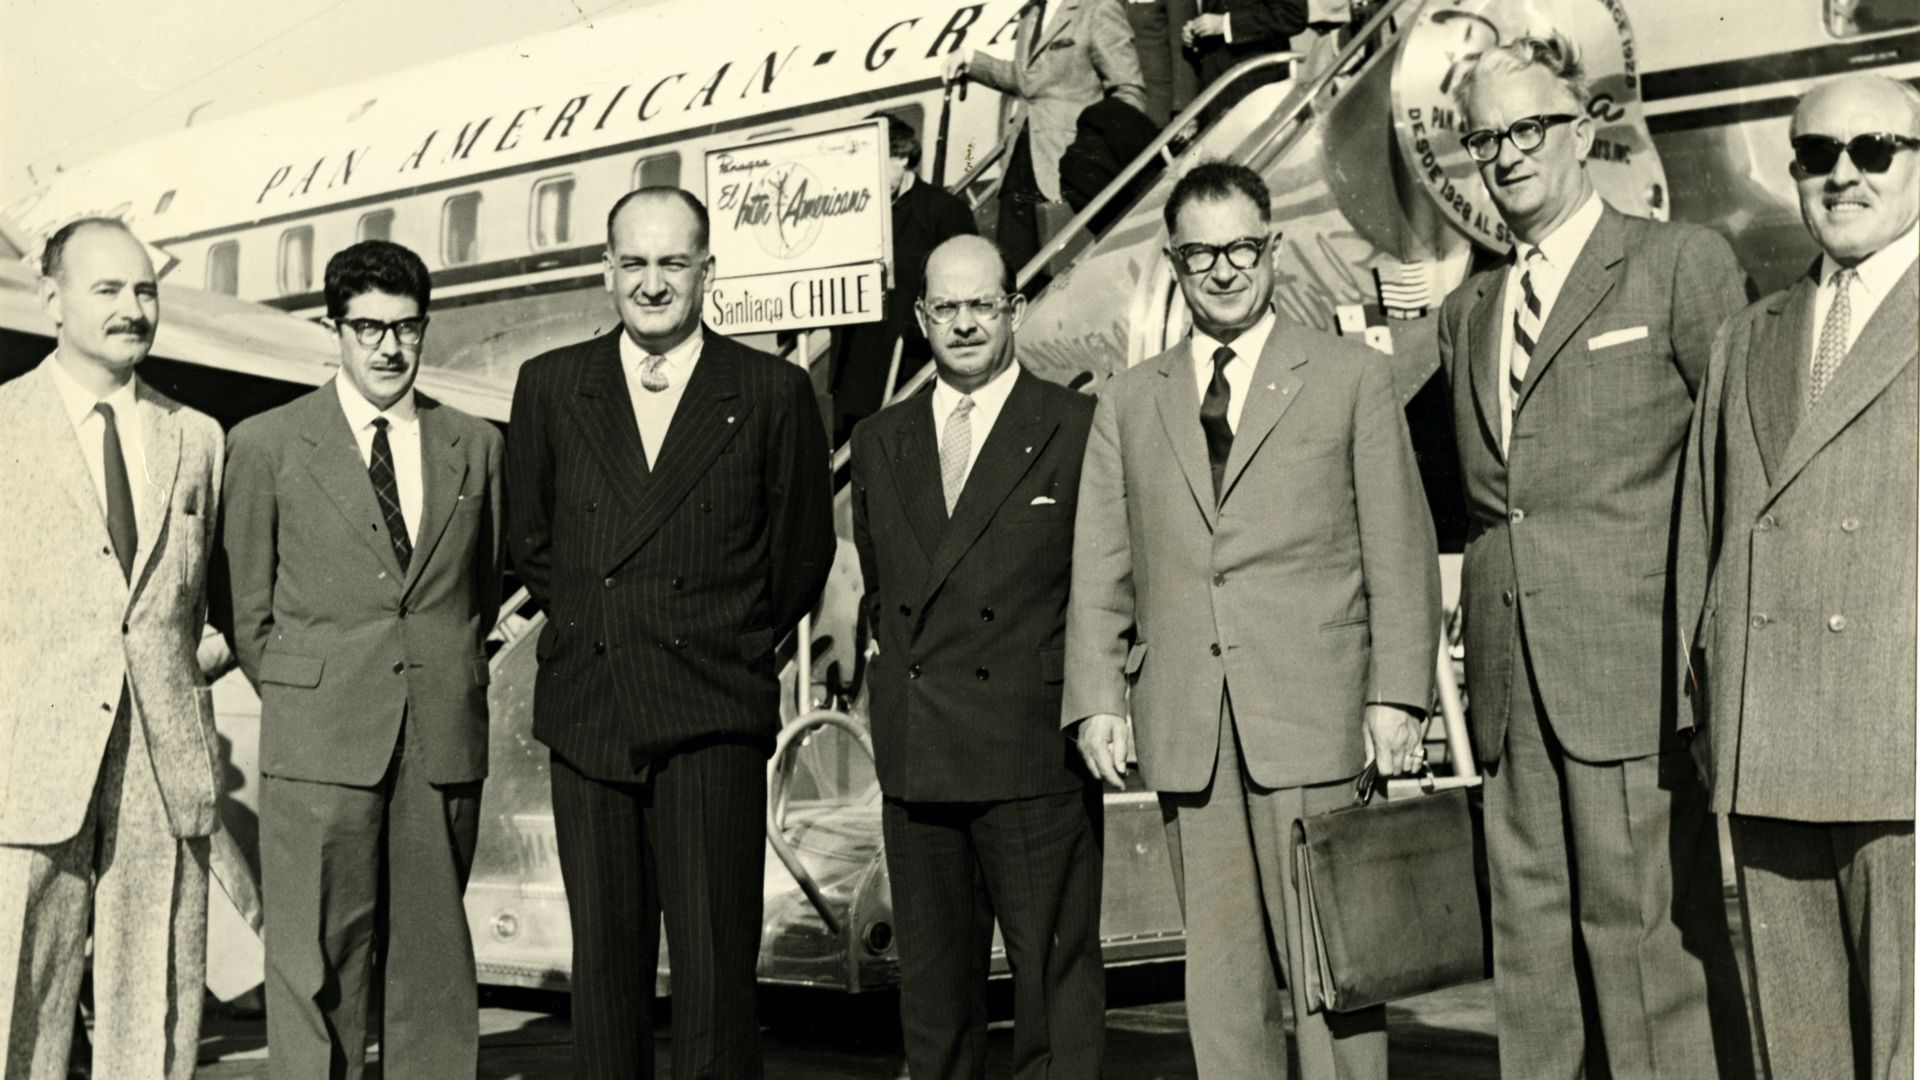 Fritz Schenker (third from right) on a visit in Santiago de Chile, October 1959